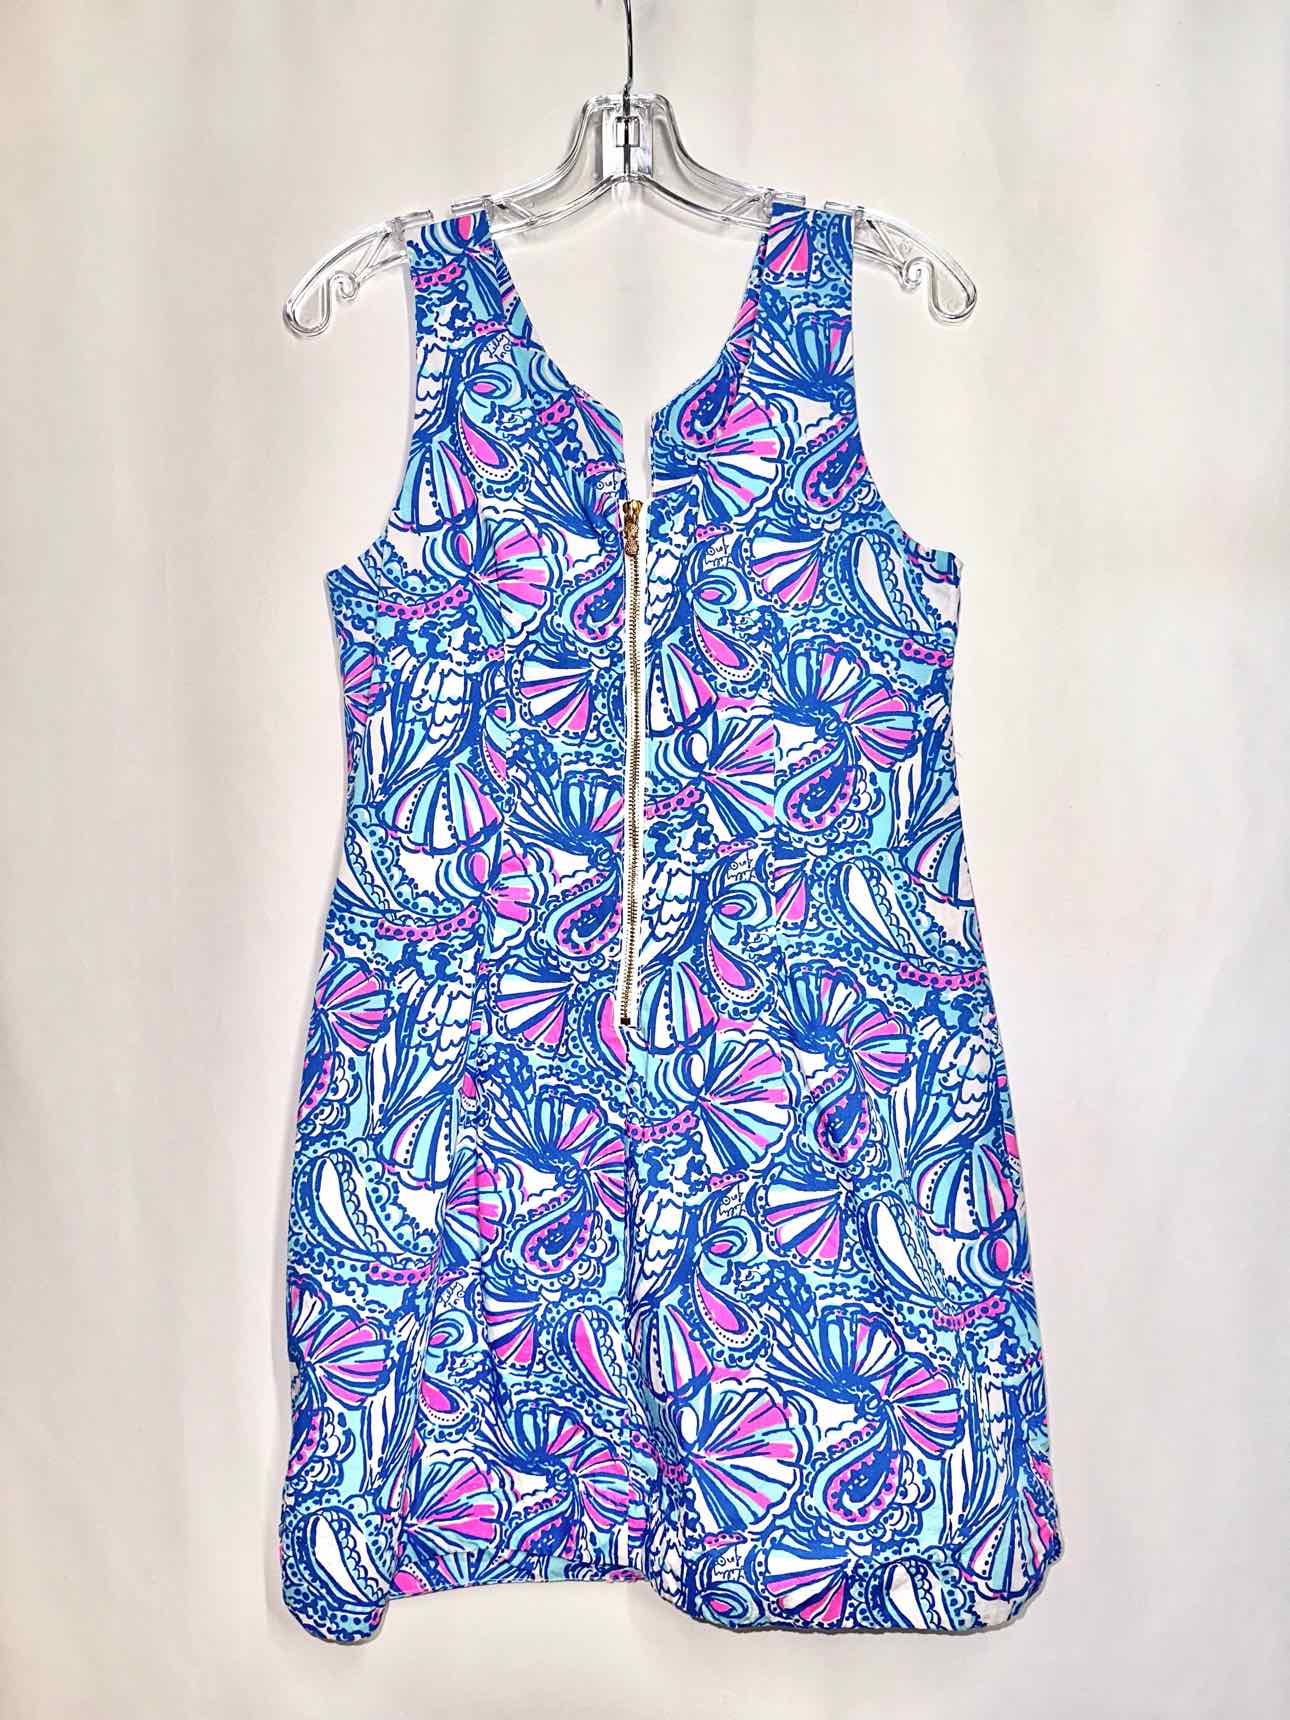 Lilly Pulitzer Sleeveless Shift Dress in My Fans